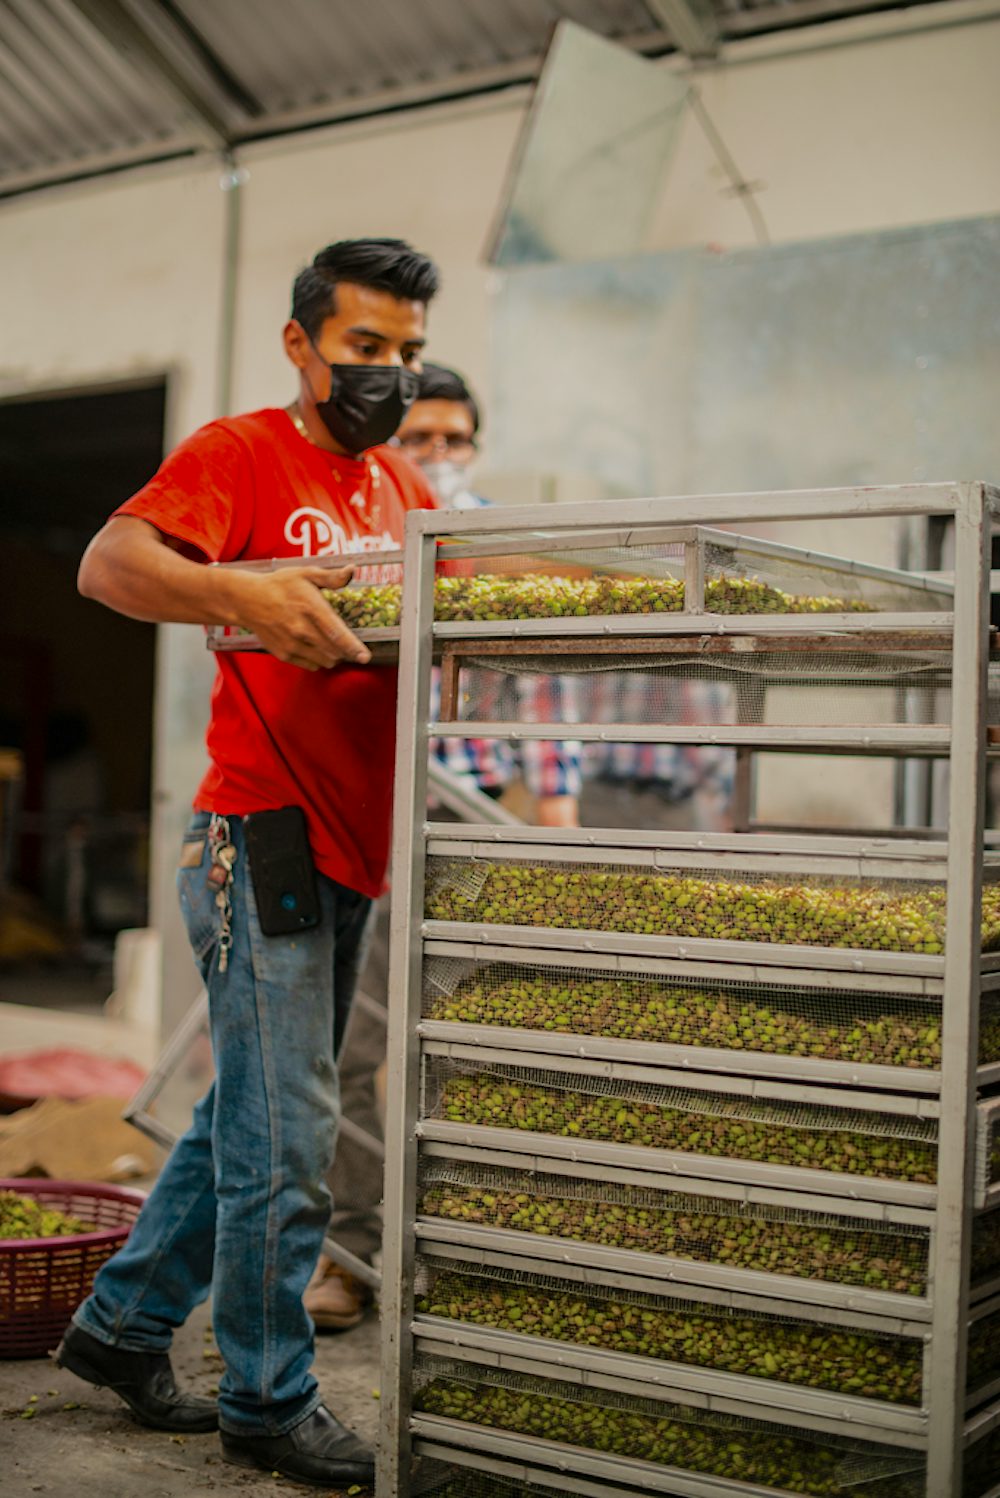 The cardamom is loaded into the trays that are stacked in two long rows. Standardization of heat and air flow is achieved by the uniform loading of the trays and racks. Depending on the amount of cardamom to be dried, the process can last from 24 to 48 hours.